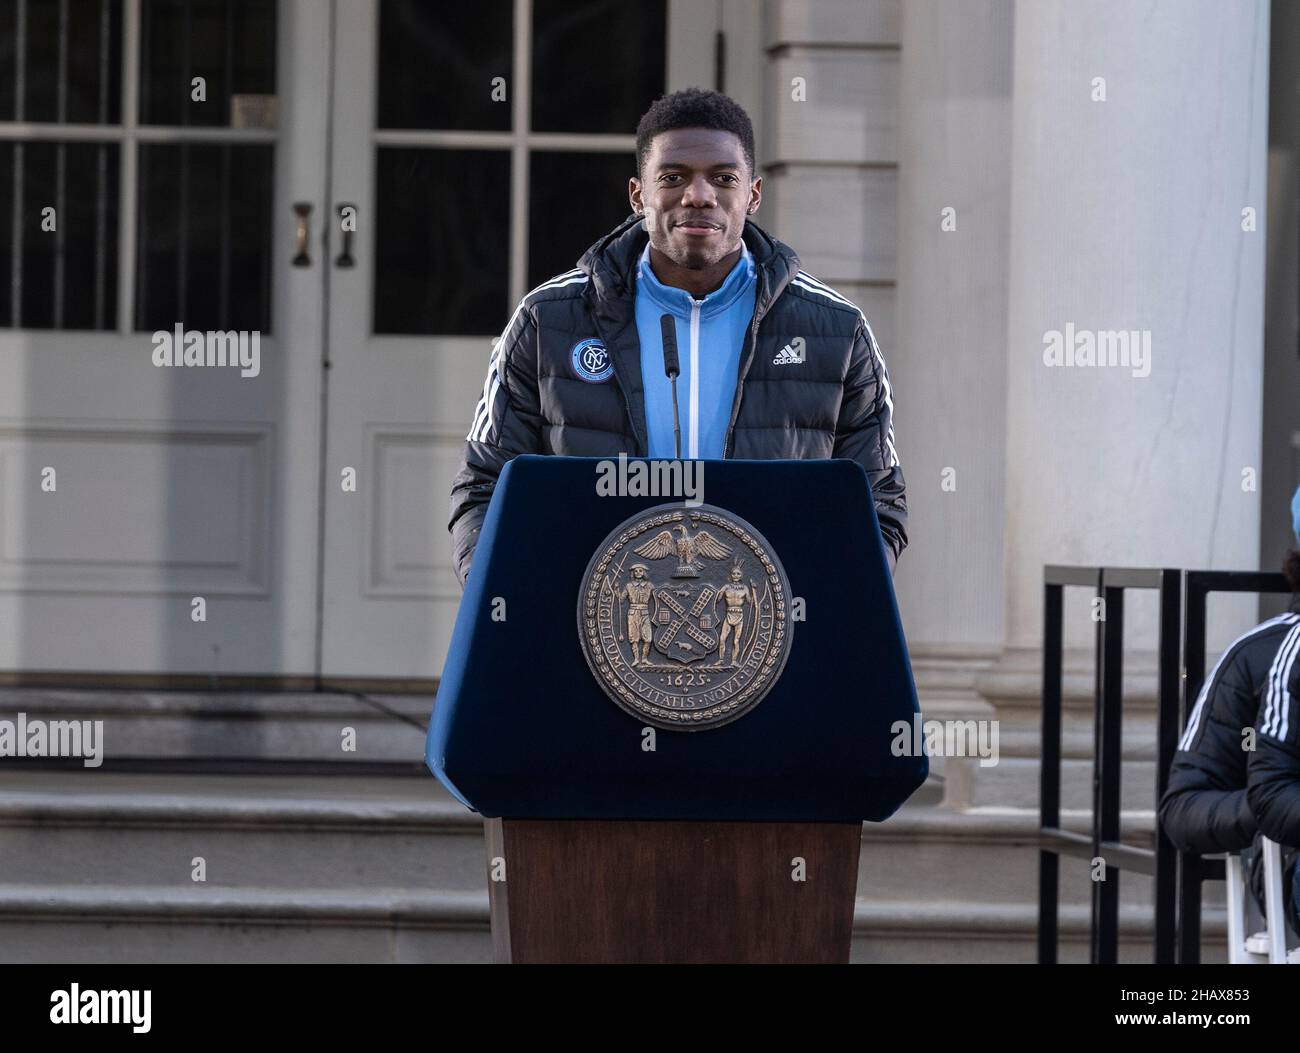 New York, New York, USA. 14th Dec, 2021. Goalkeeper Sean Johnson speaks during celebration for NYCFC winning the 2021 MLS Cup on City Hall steps. NYCFC finished the regular season in 4th place and played almost all playoff games away. Winning the MLS Cup is the first trophy won by the franchise since it was established 7 years ago. NYCFC is part of the City Football Group which owns football clubs around the world. Sean Johnson was named MVP of the playofffs. (Credit Image: © Lev Radin/Pacific Press via ZUMA Press Wire) Stock Photo